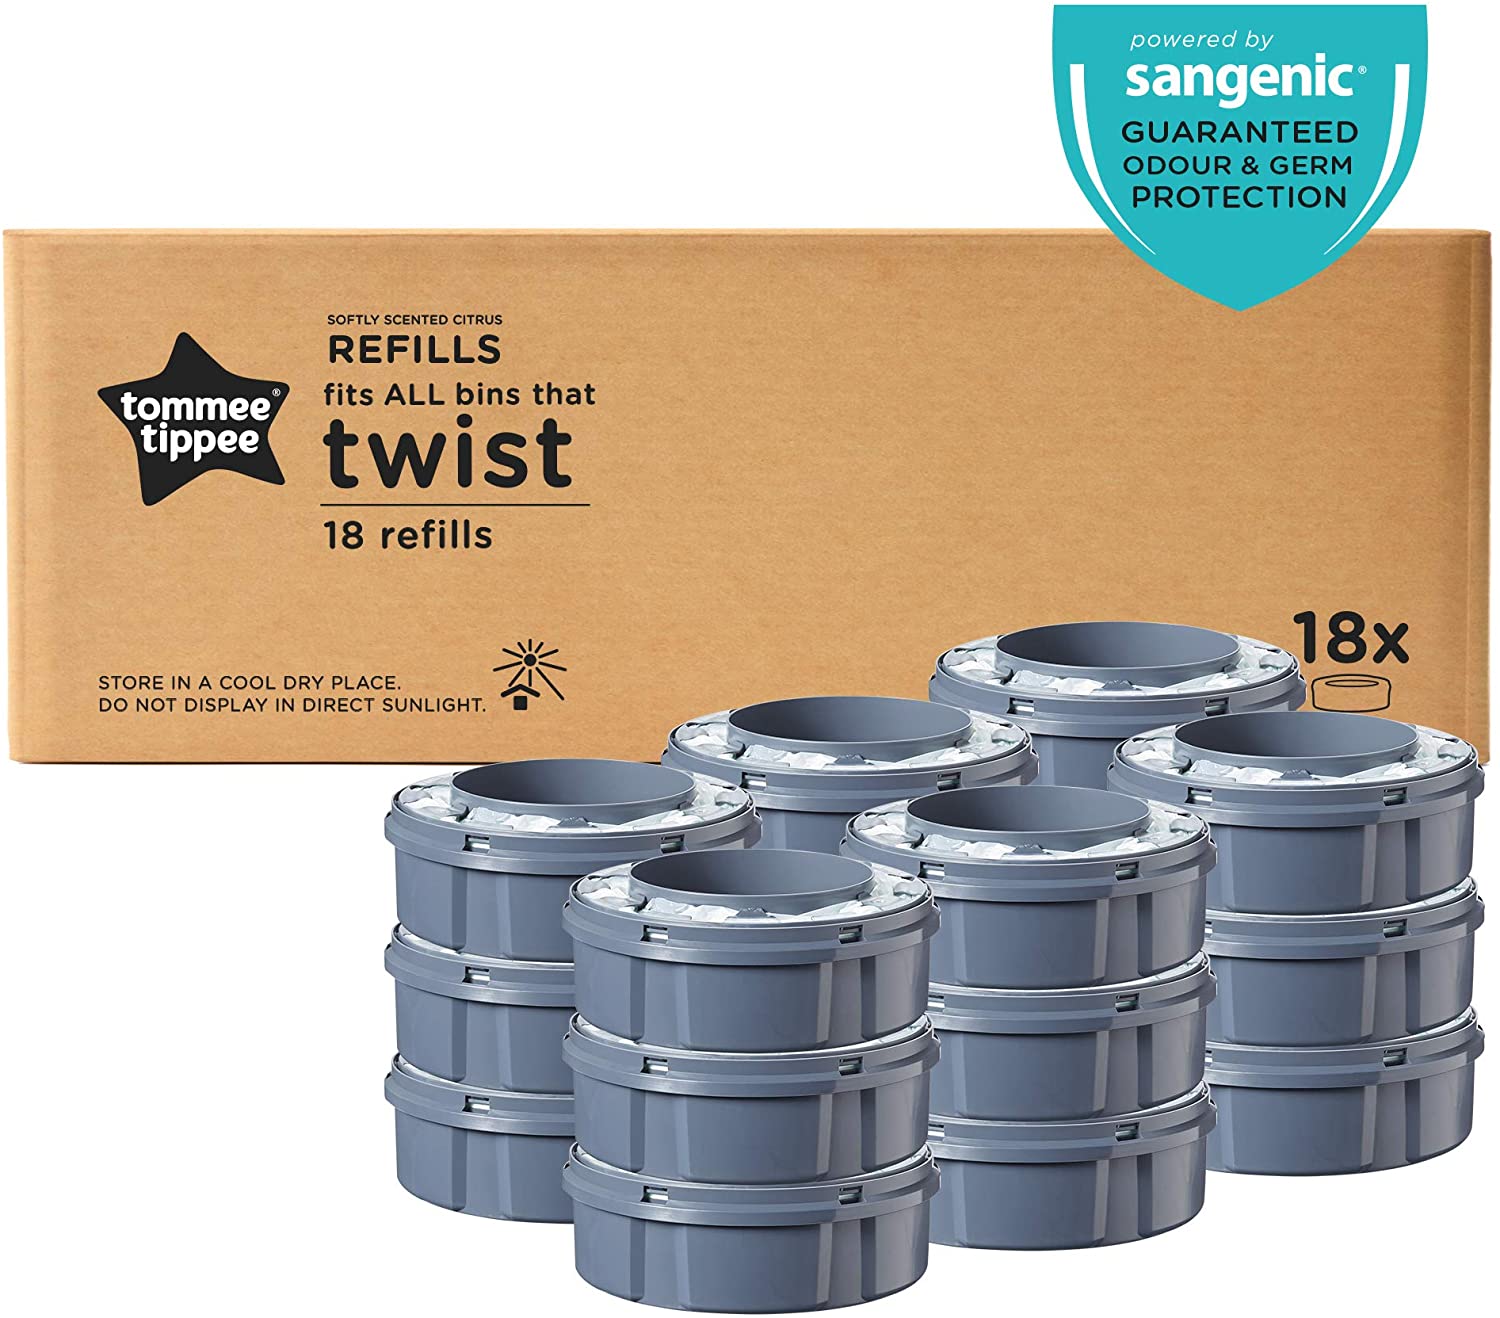 Tommee Tippee Refill Cassettes for Twist & Click Advanced Nappy Disposal System with Sustainably Sourced Antibacterial Greenfilm, Pack of 18